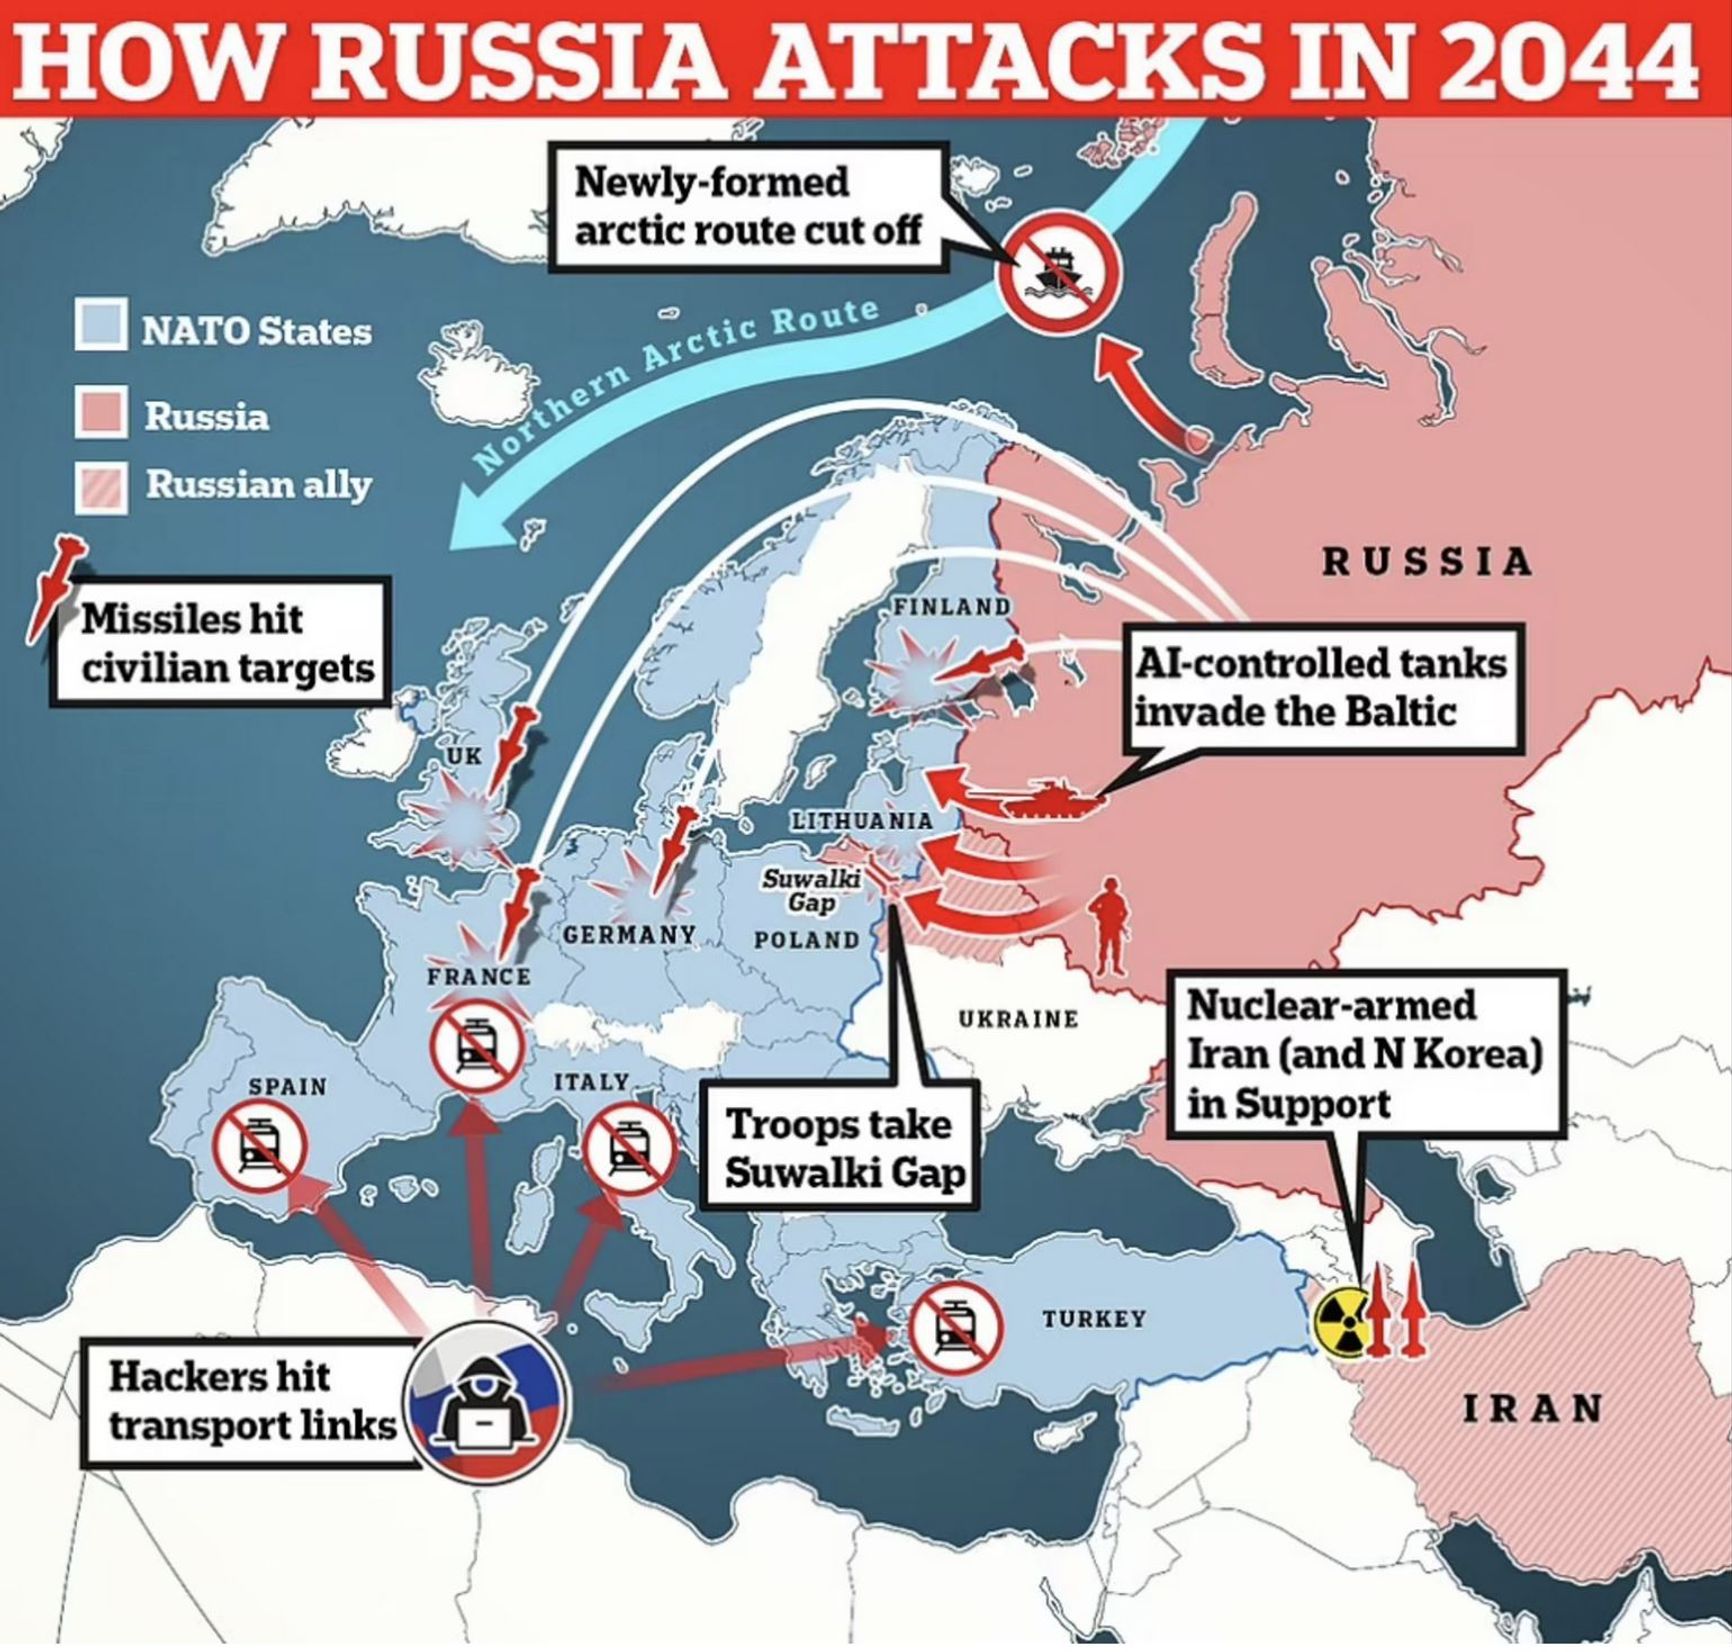 Daily Mail's scenario of war between Russia and NATO in Europe in 2044